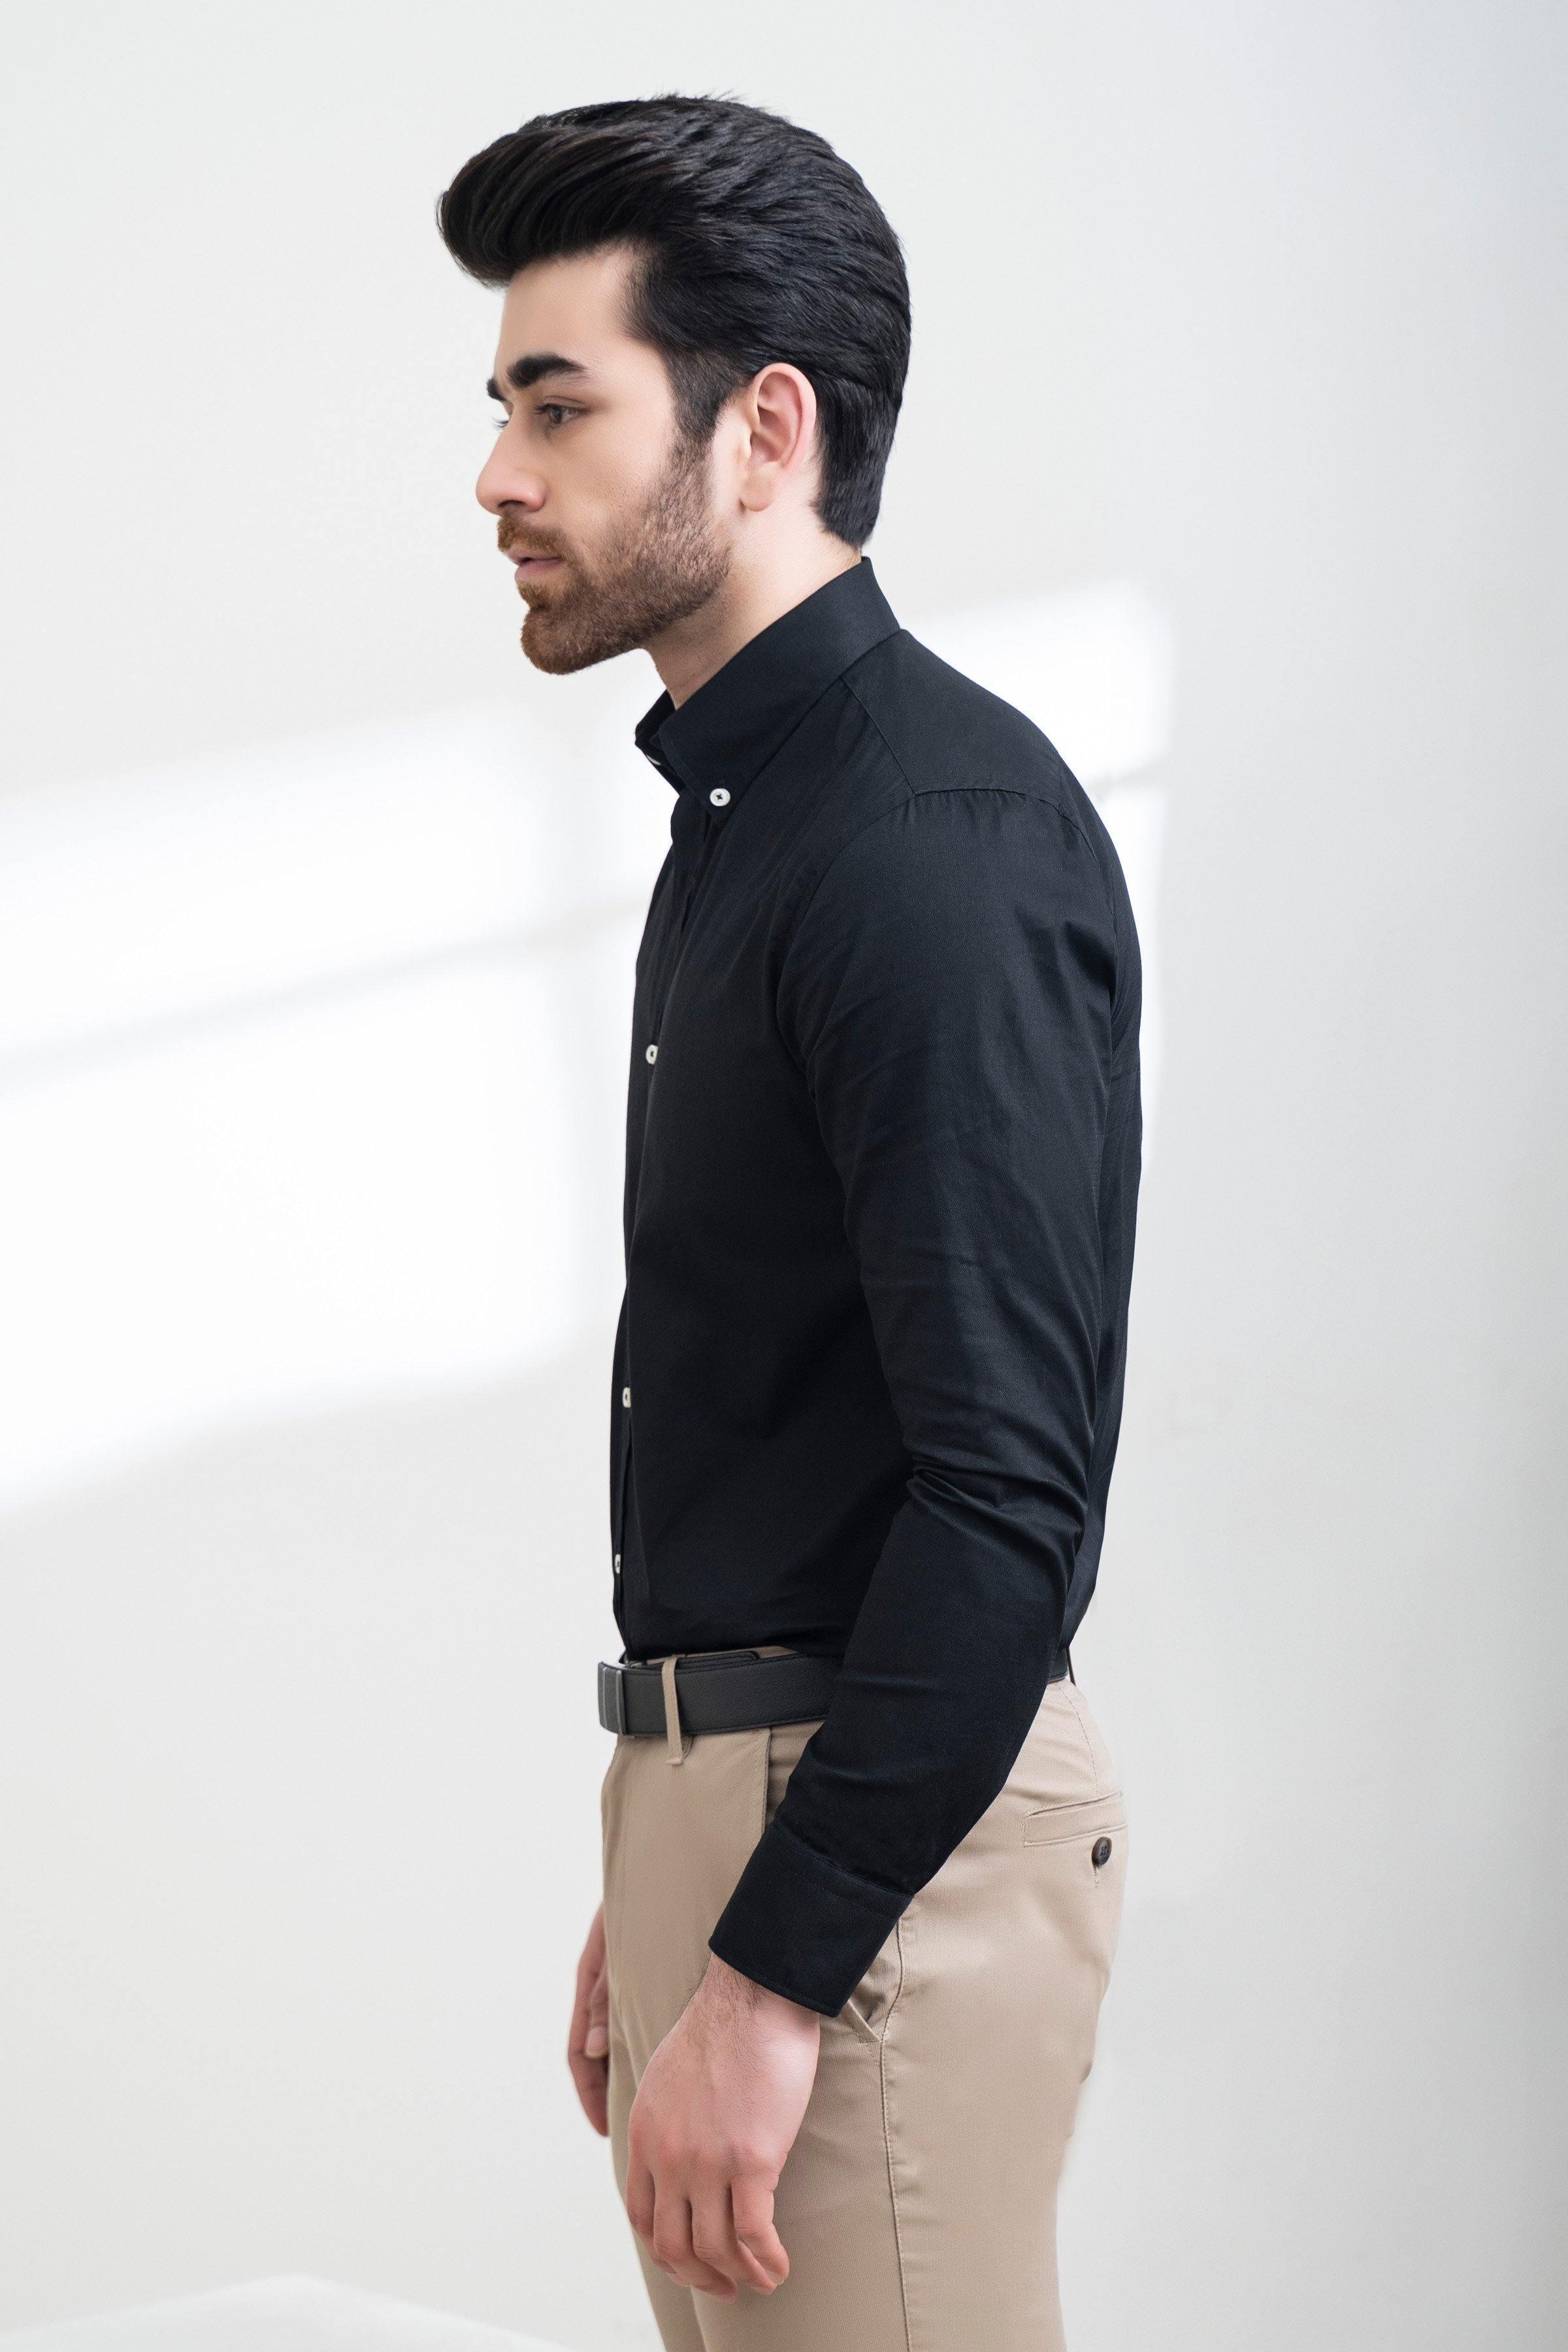 SMART SHIRT FULL SLEEVE BUTTON DOWN BLACK at Charcoal Clothing